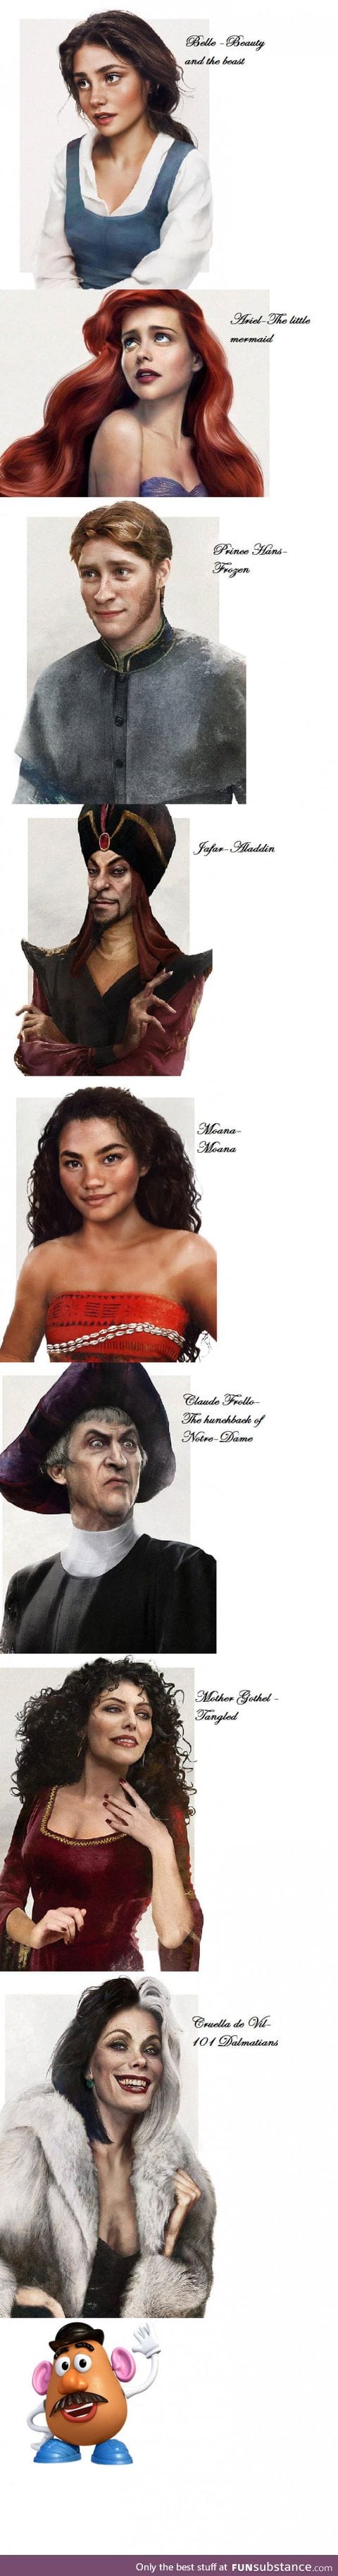 Stunning realistic versions of disney characters. Part two coming soon!